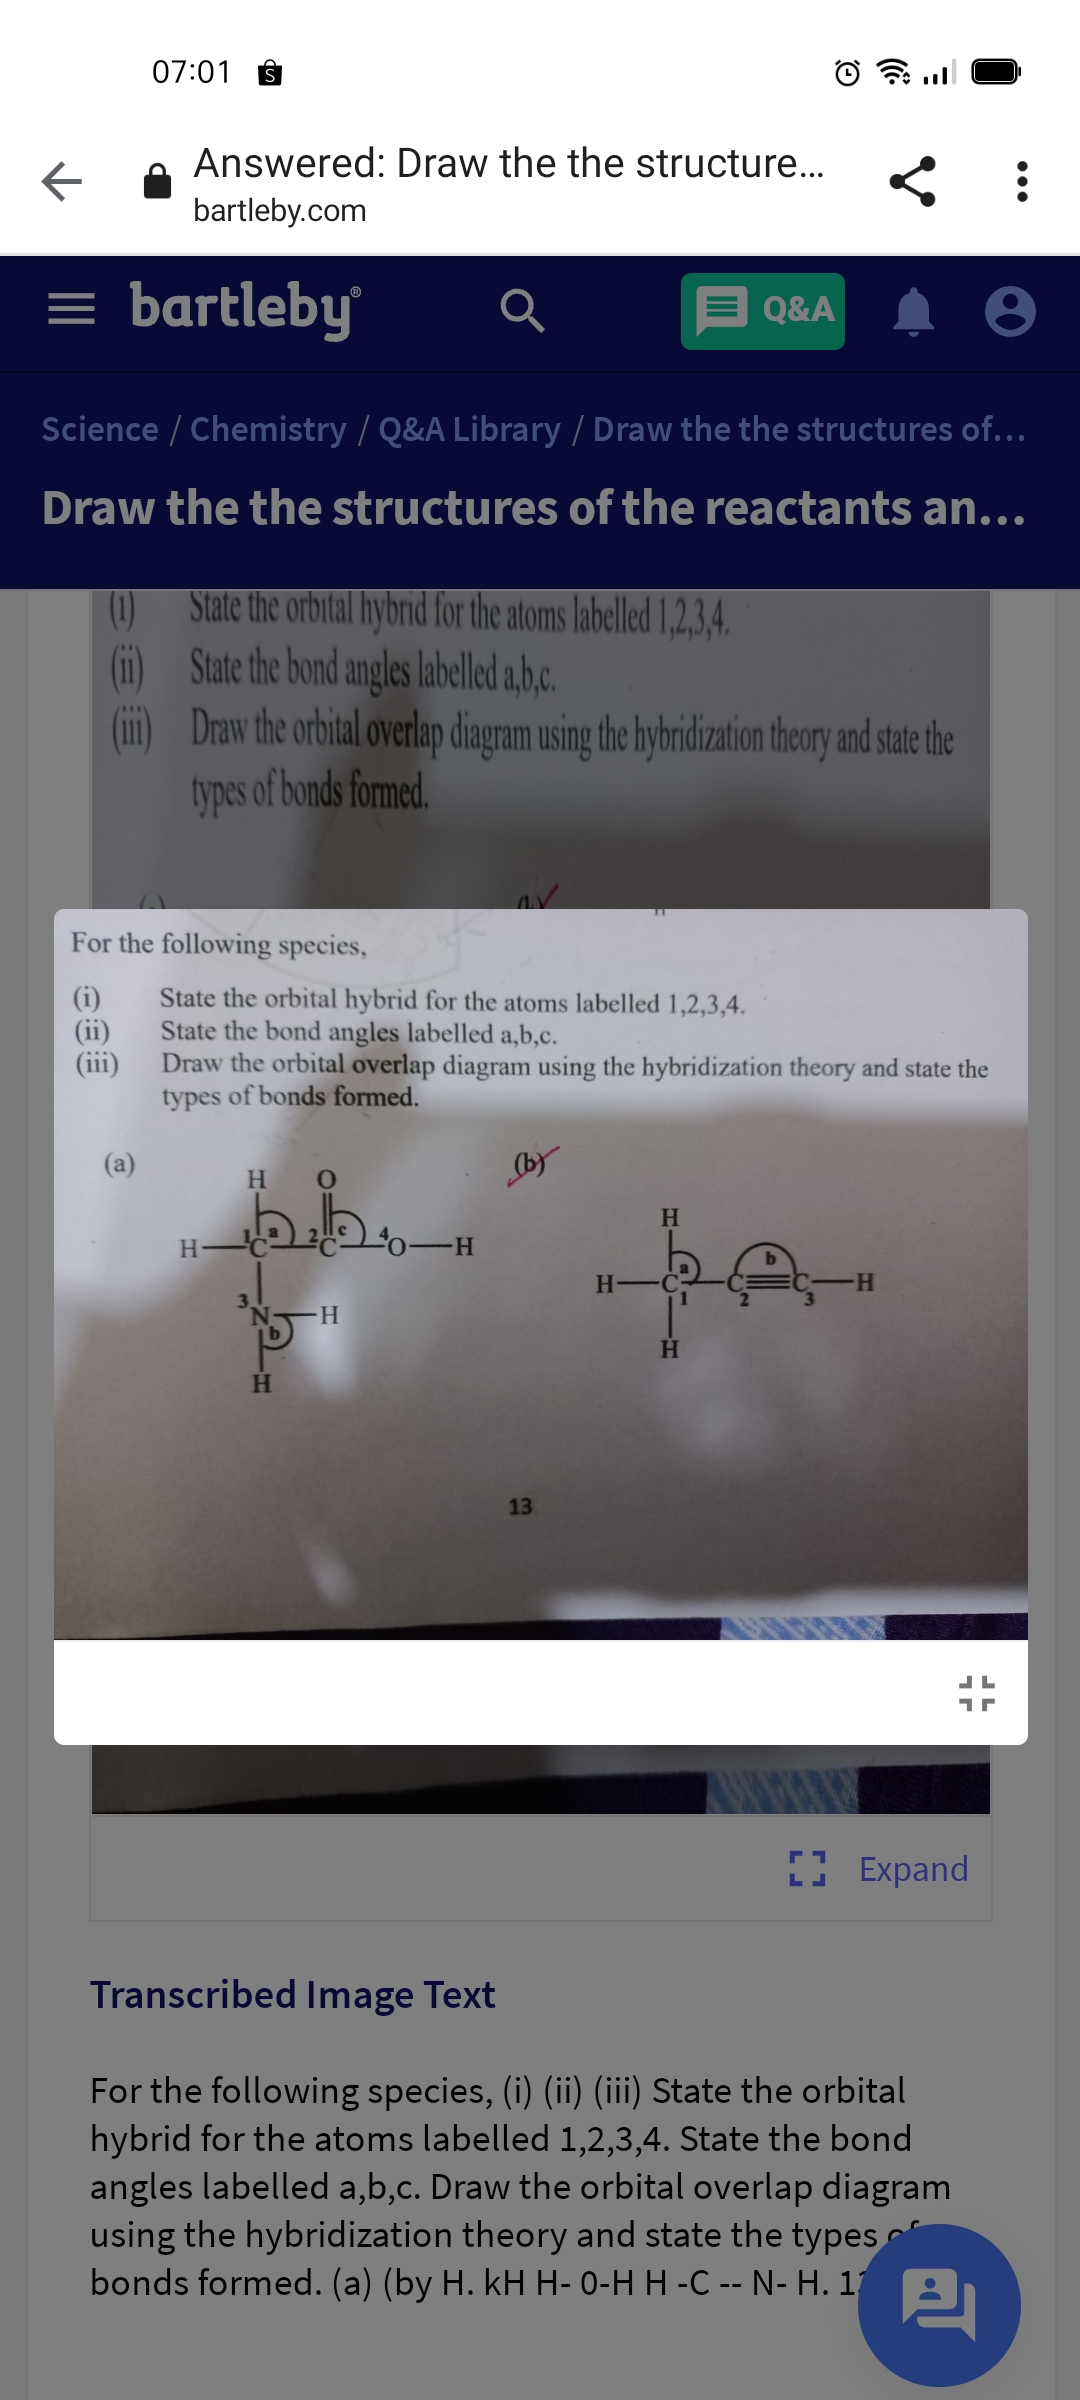 07:01
Answered: Draw the the structure..
bartleby.com
= bartleby
E Q&A
Science / Chemistry / Q&A Library / Draw the the structures of...
Draw the the structures of the reactants an...
State the orbital hybrid for the atoms labelled 1,2,3,4.
(0)
State the bond angles labelled a,b.c.
Draw the orbital overlap diagram using the hybridization theory and state the
types of bonds formed,
For the following species,
State the orbital hybrid for the atoms labelled 1,2,3,4.
State the bond angles labelled a,b,c.
Draw the orbital overlap diagram using the hybridization theory and state the
types of bonds formed.
(ii)
(a)
by
H.
H.
H.
H -C
H-
H
13
I Expand
Transcribed Image Text
For the following species, (i) (ii) (iii) State the orbital
hybrid for the atoms labelled 1,2,3,4. State the bond
angles labelled a,b,c. Draw the orbital overlap diagram
using the hybridization theory and state the types
bonds formed. (a) (by H. kH H- 0-H H -C -- N- H. 1 A.
